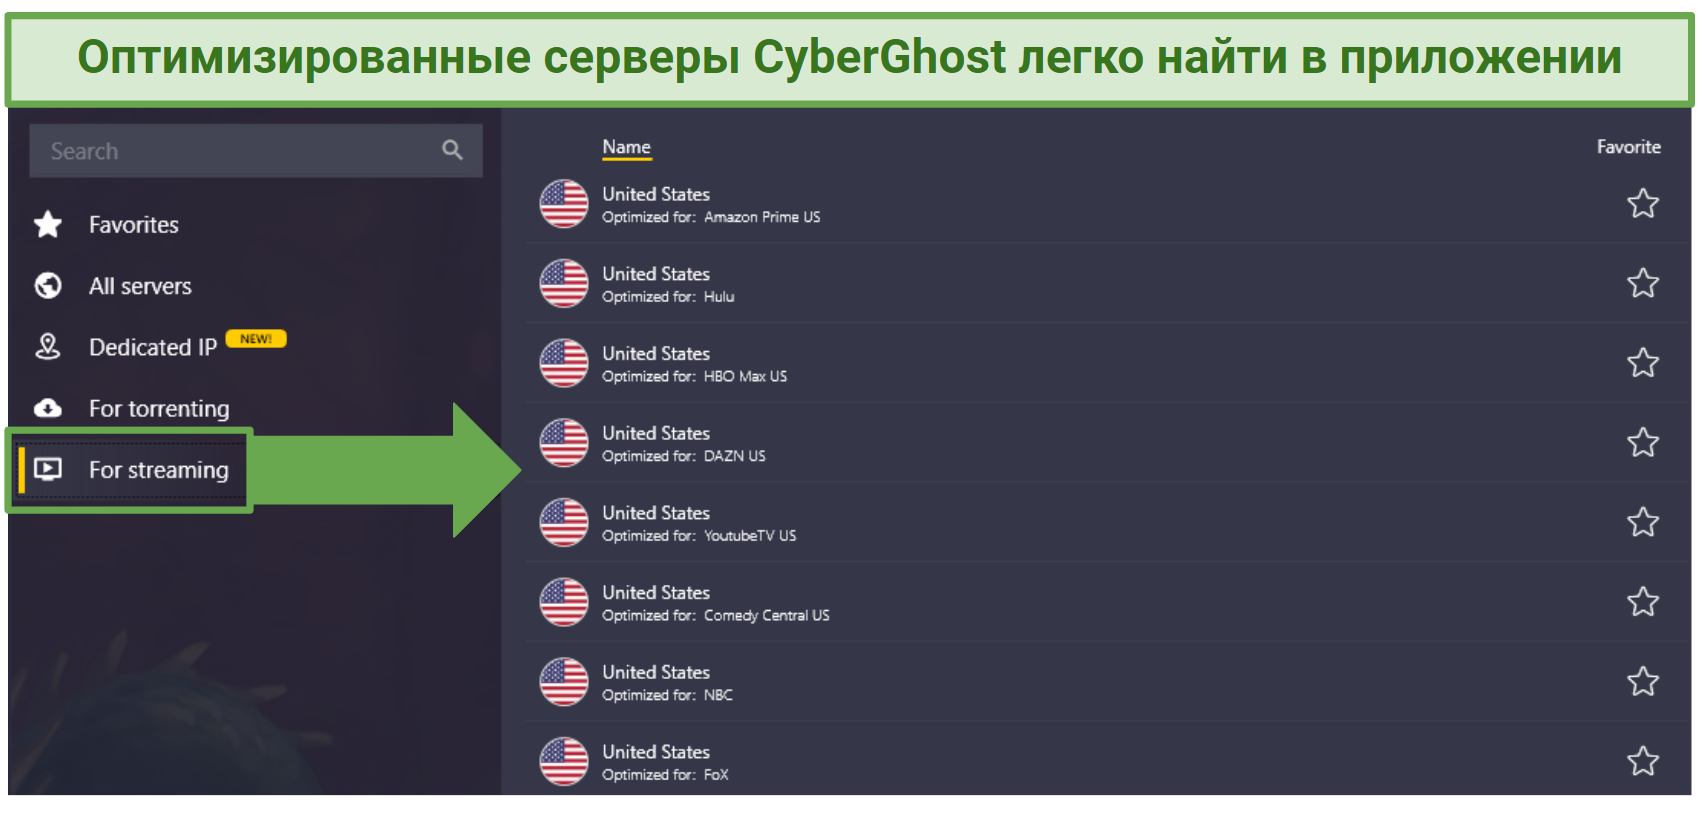 Screenshot of CyberGhost's optimized streaming servers on the Windows app